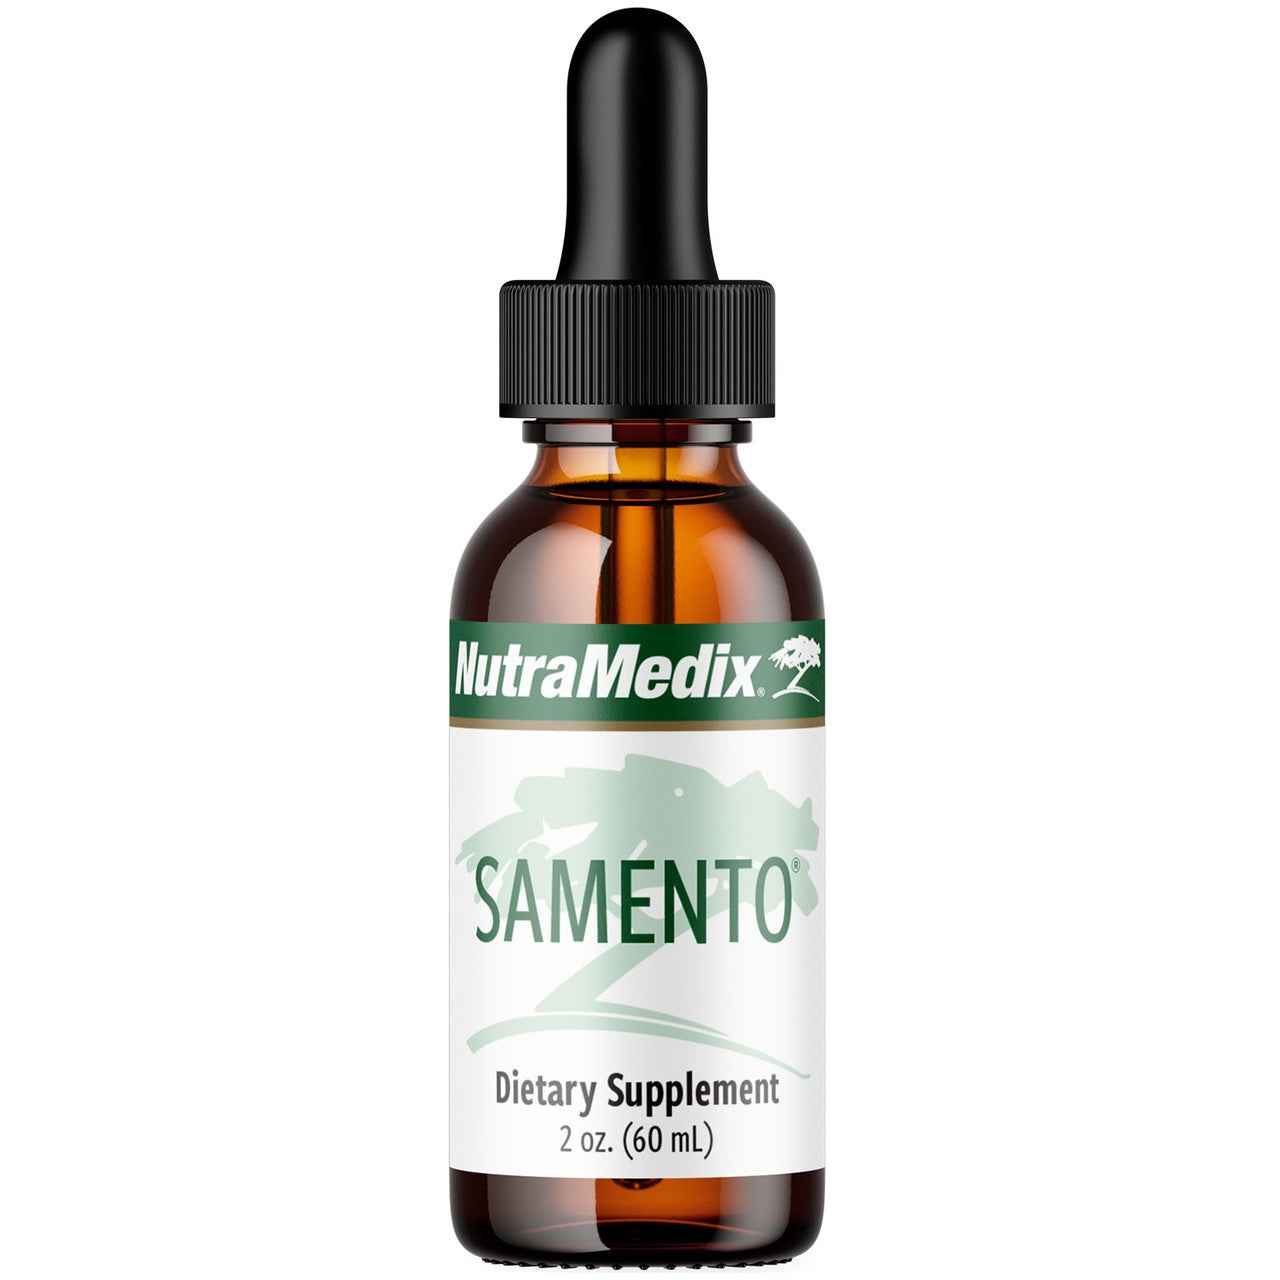 Samento, Immune/Microbial Support.